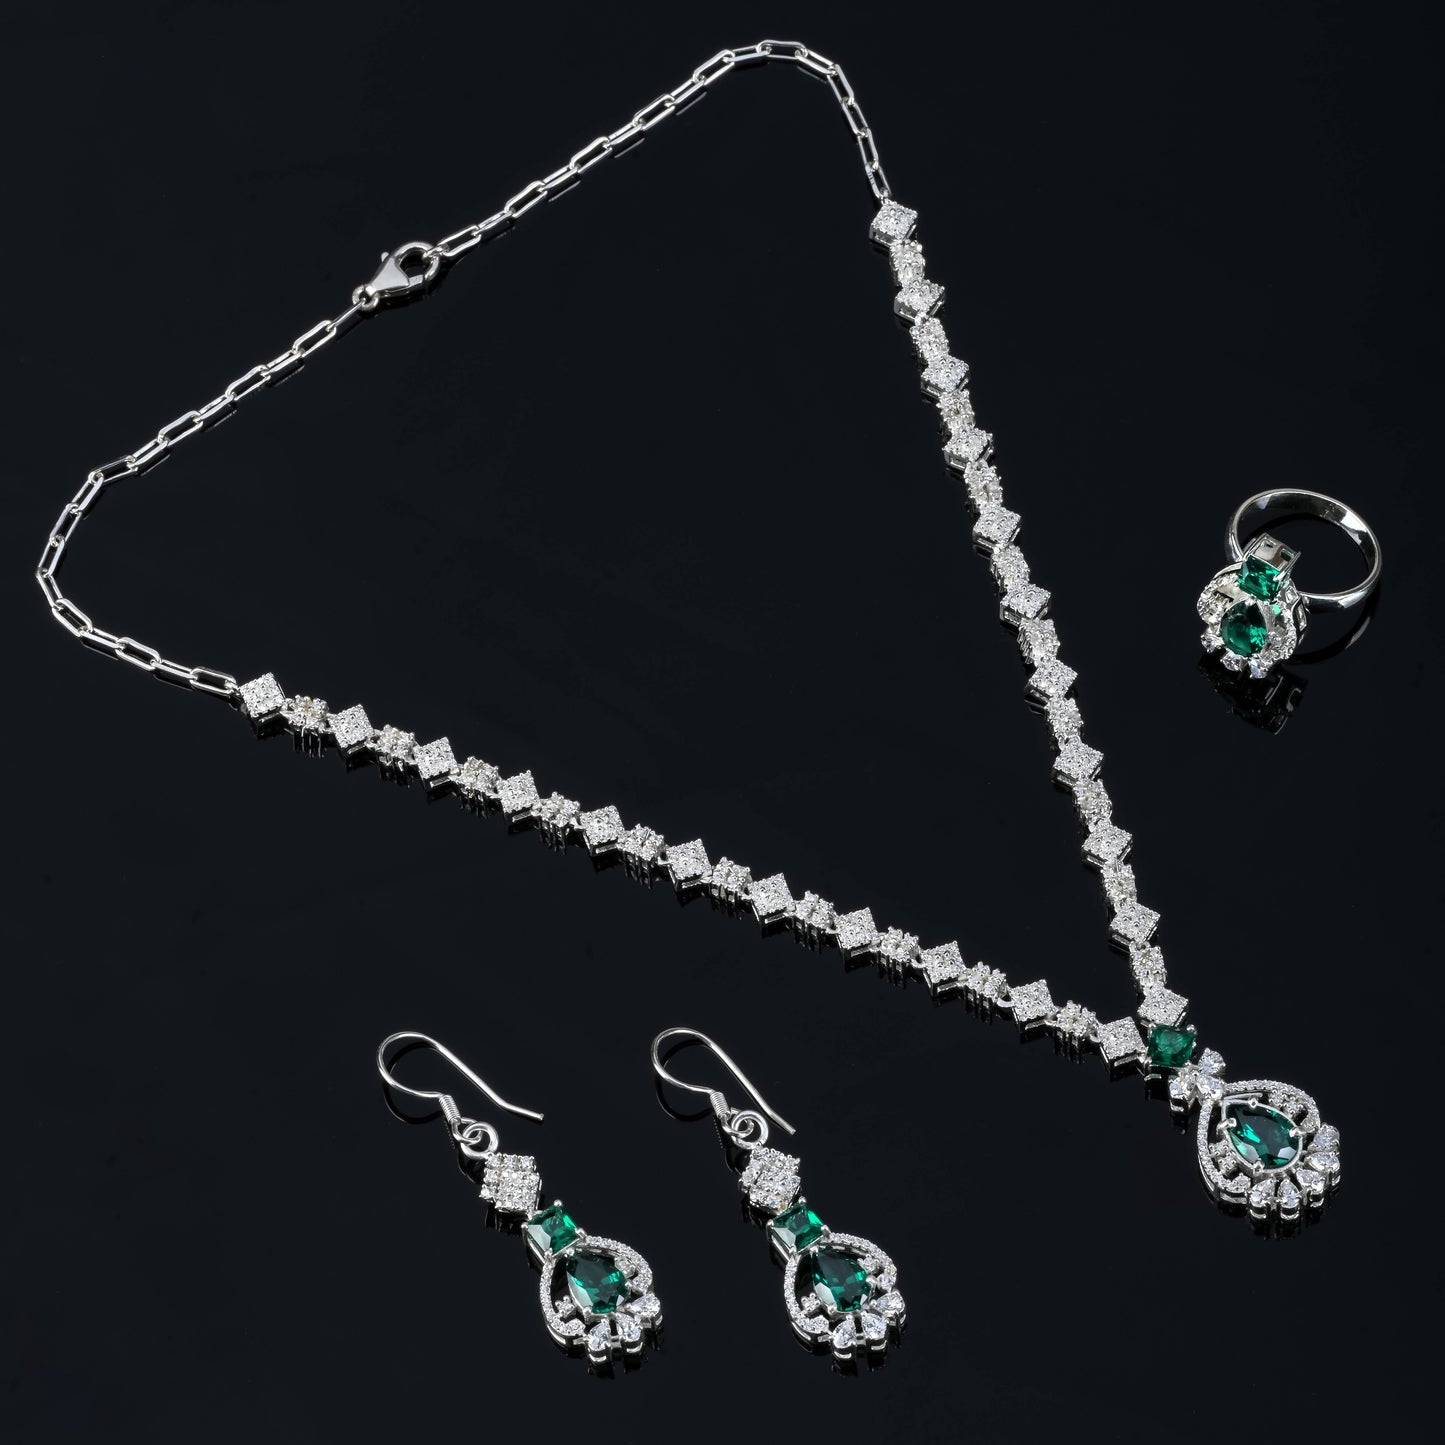 Elegant Silver Necklace Earrings Ring Jewelry Set | 925 Silver With Nano Green & White Zircon Gemstone Jewelry Set For Special Occasions